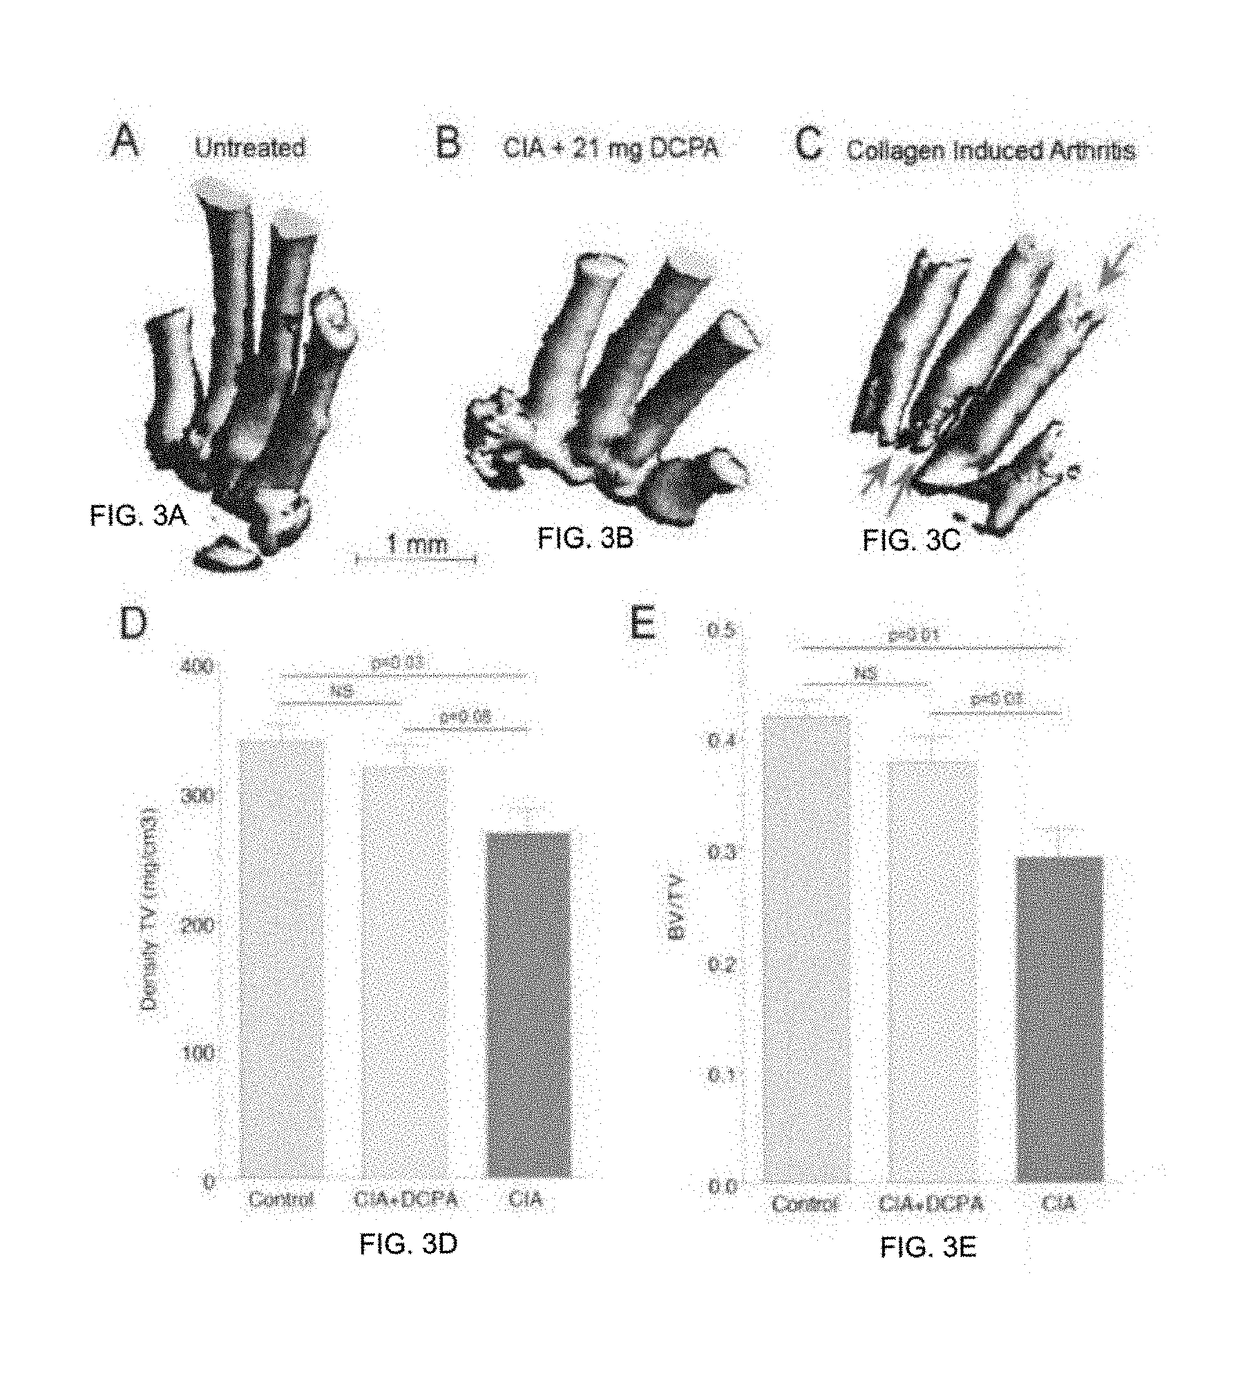 Water soluble haloanilide calcium-release calcium channel inhibitory compounds and methods to control bone erosion and inflammation associated with arthritides